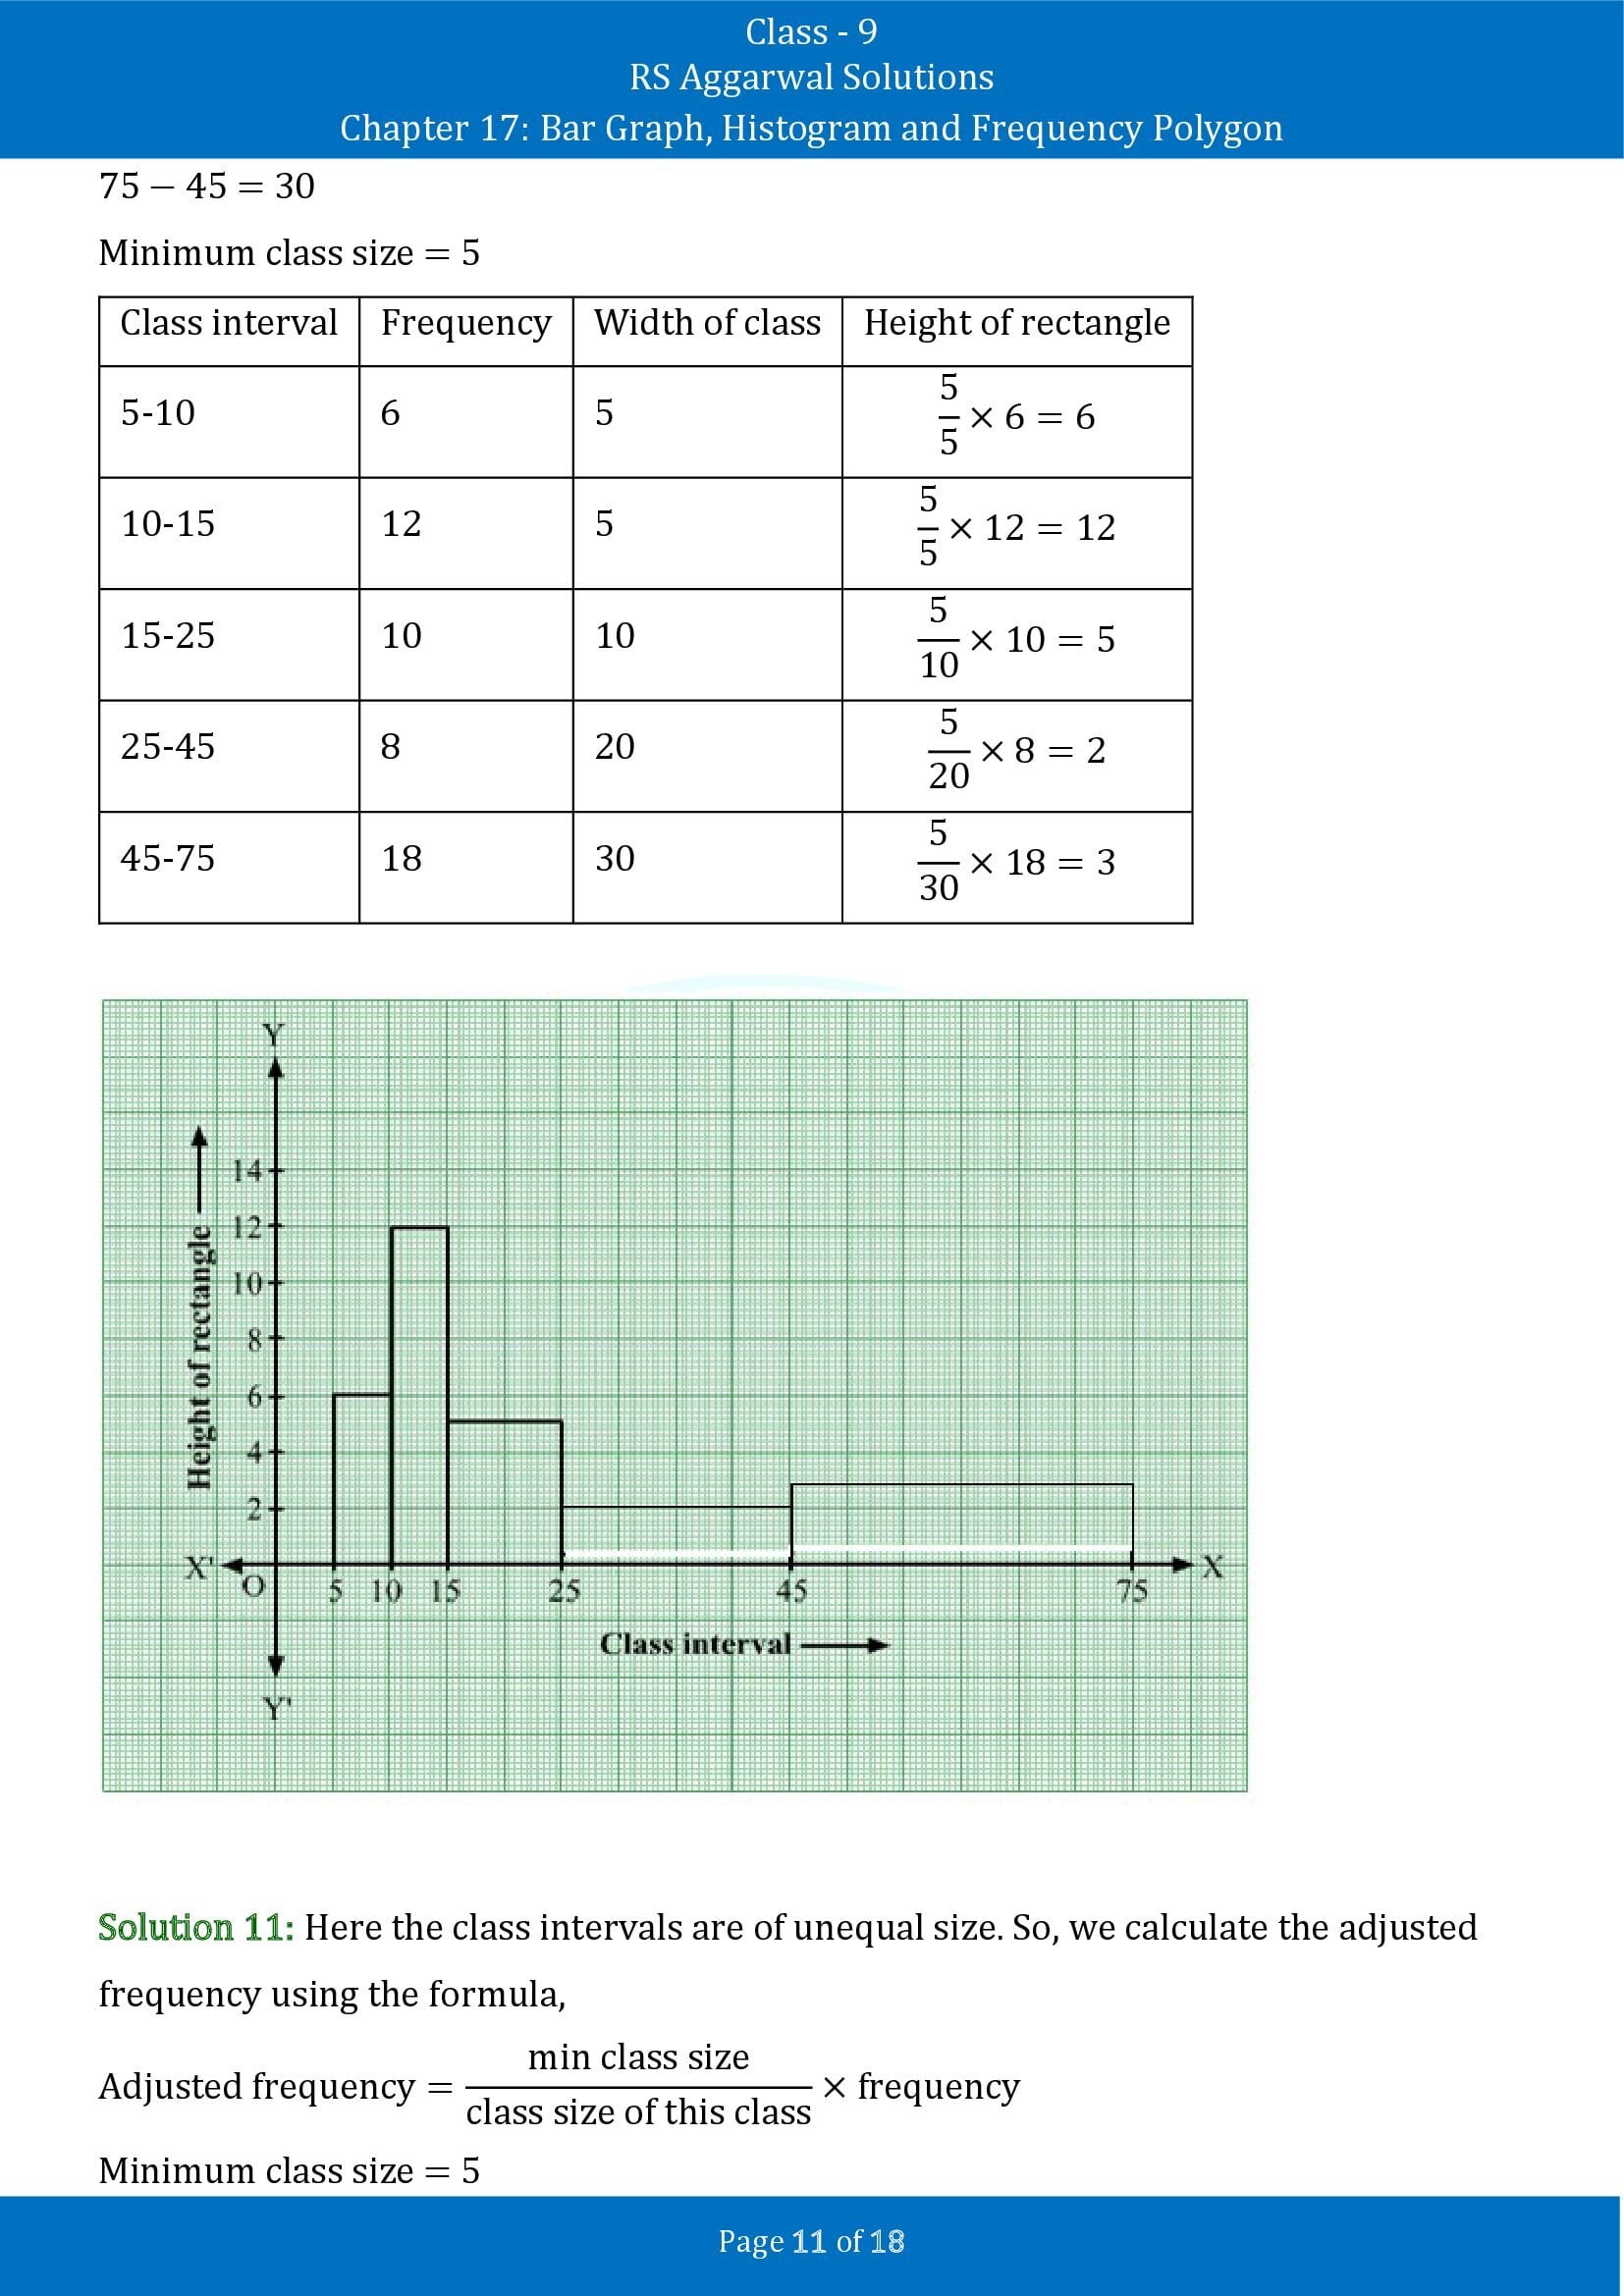 RS Aggarwal Solutions Class 9 Chapter 17 Bar Graph Histogram and Frequency Polygon Exercise 17B 00011